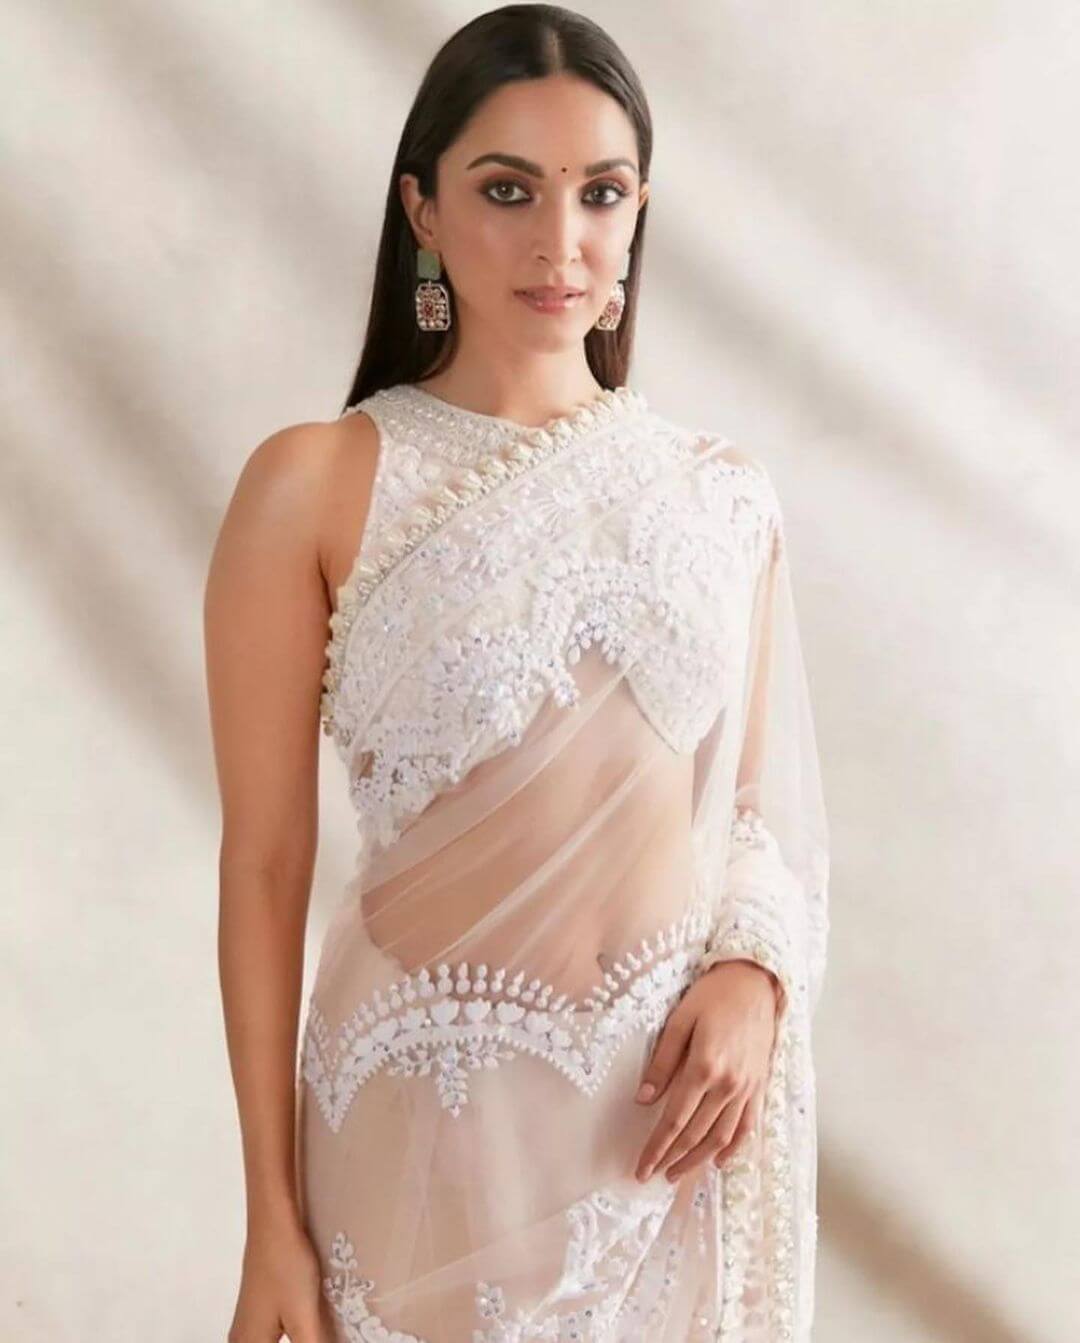 Kiara Advani's Classy And Adorable Look In Emebellishing White Saree Fashionable Outfits Inspired By Bollywood Divas